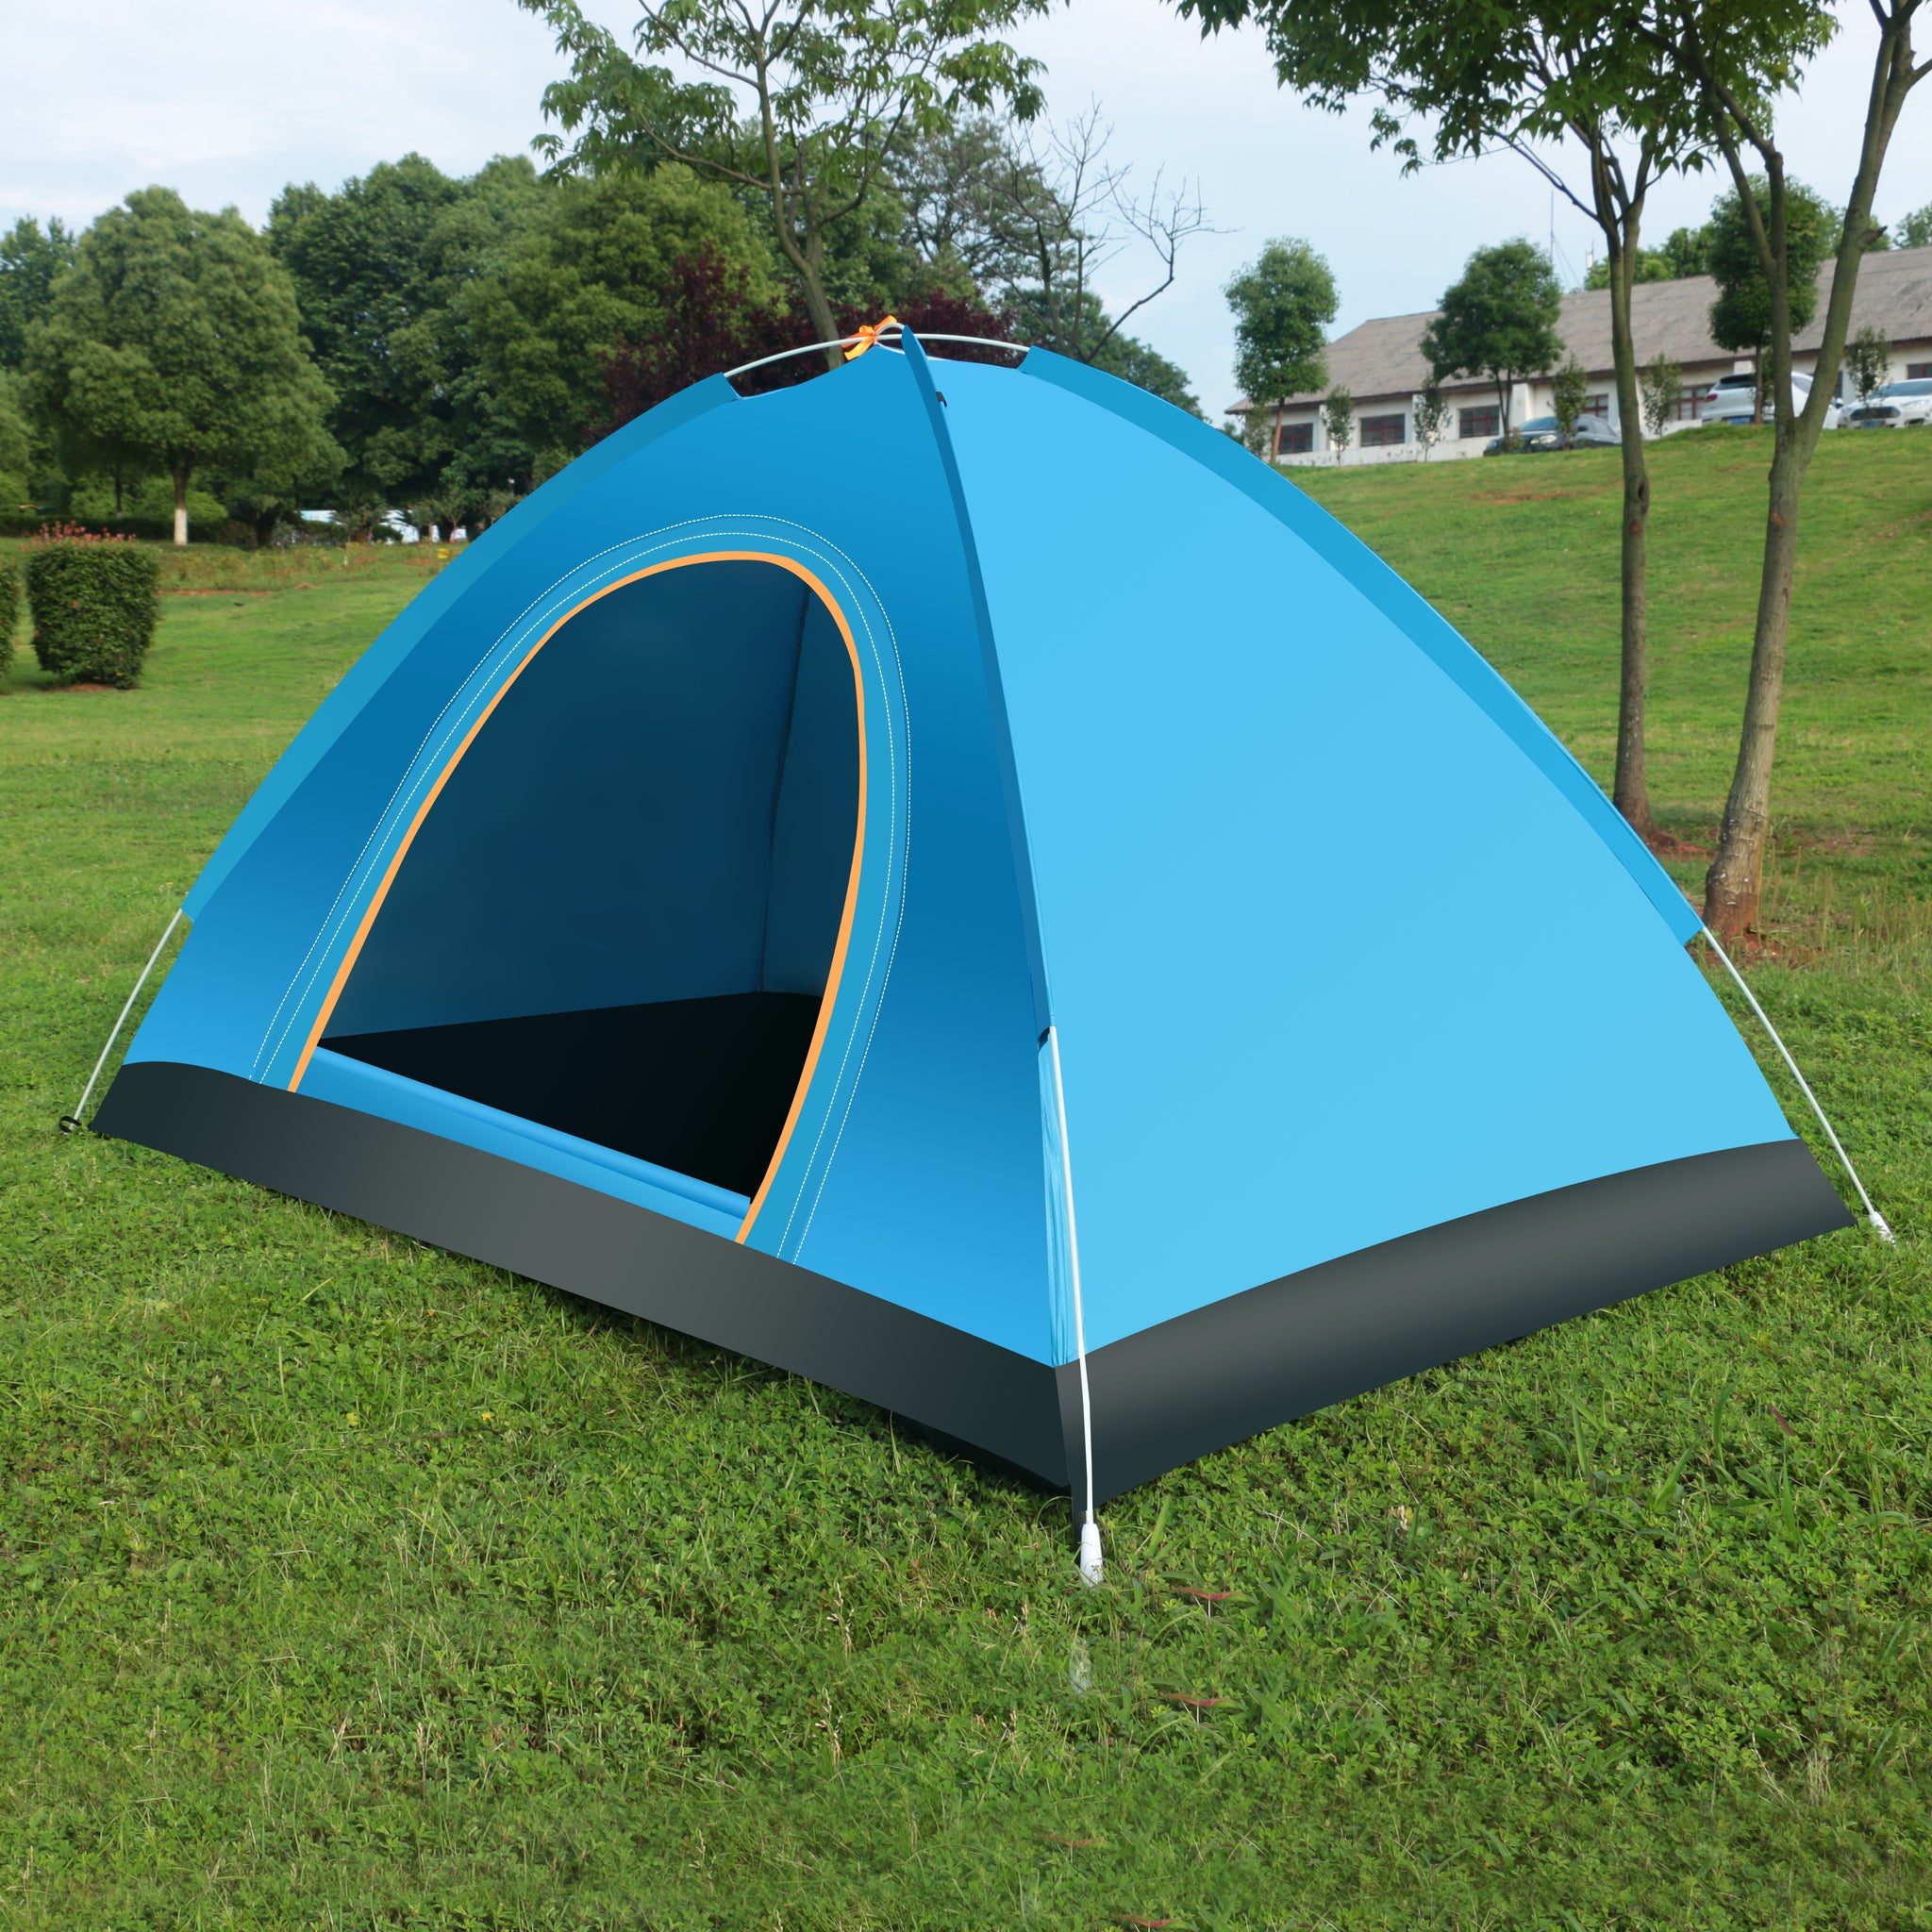 5 Person Camping Tents